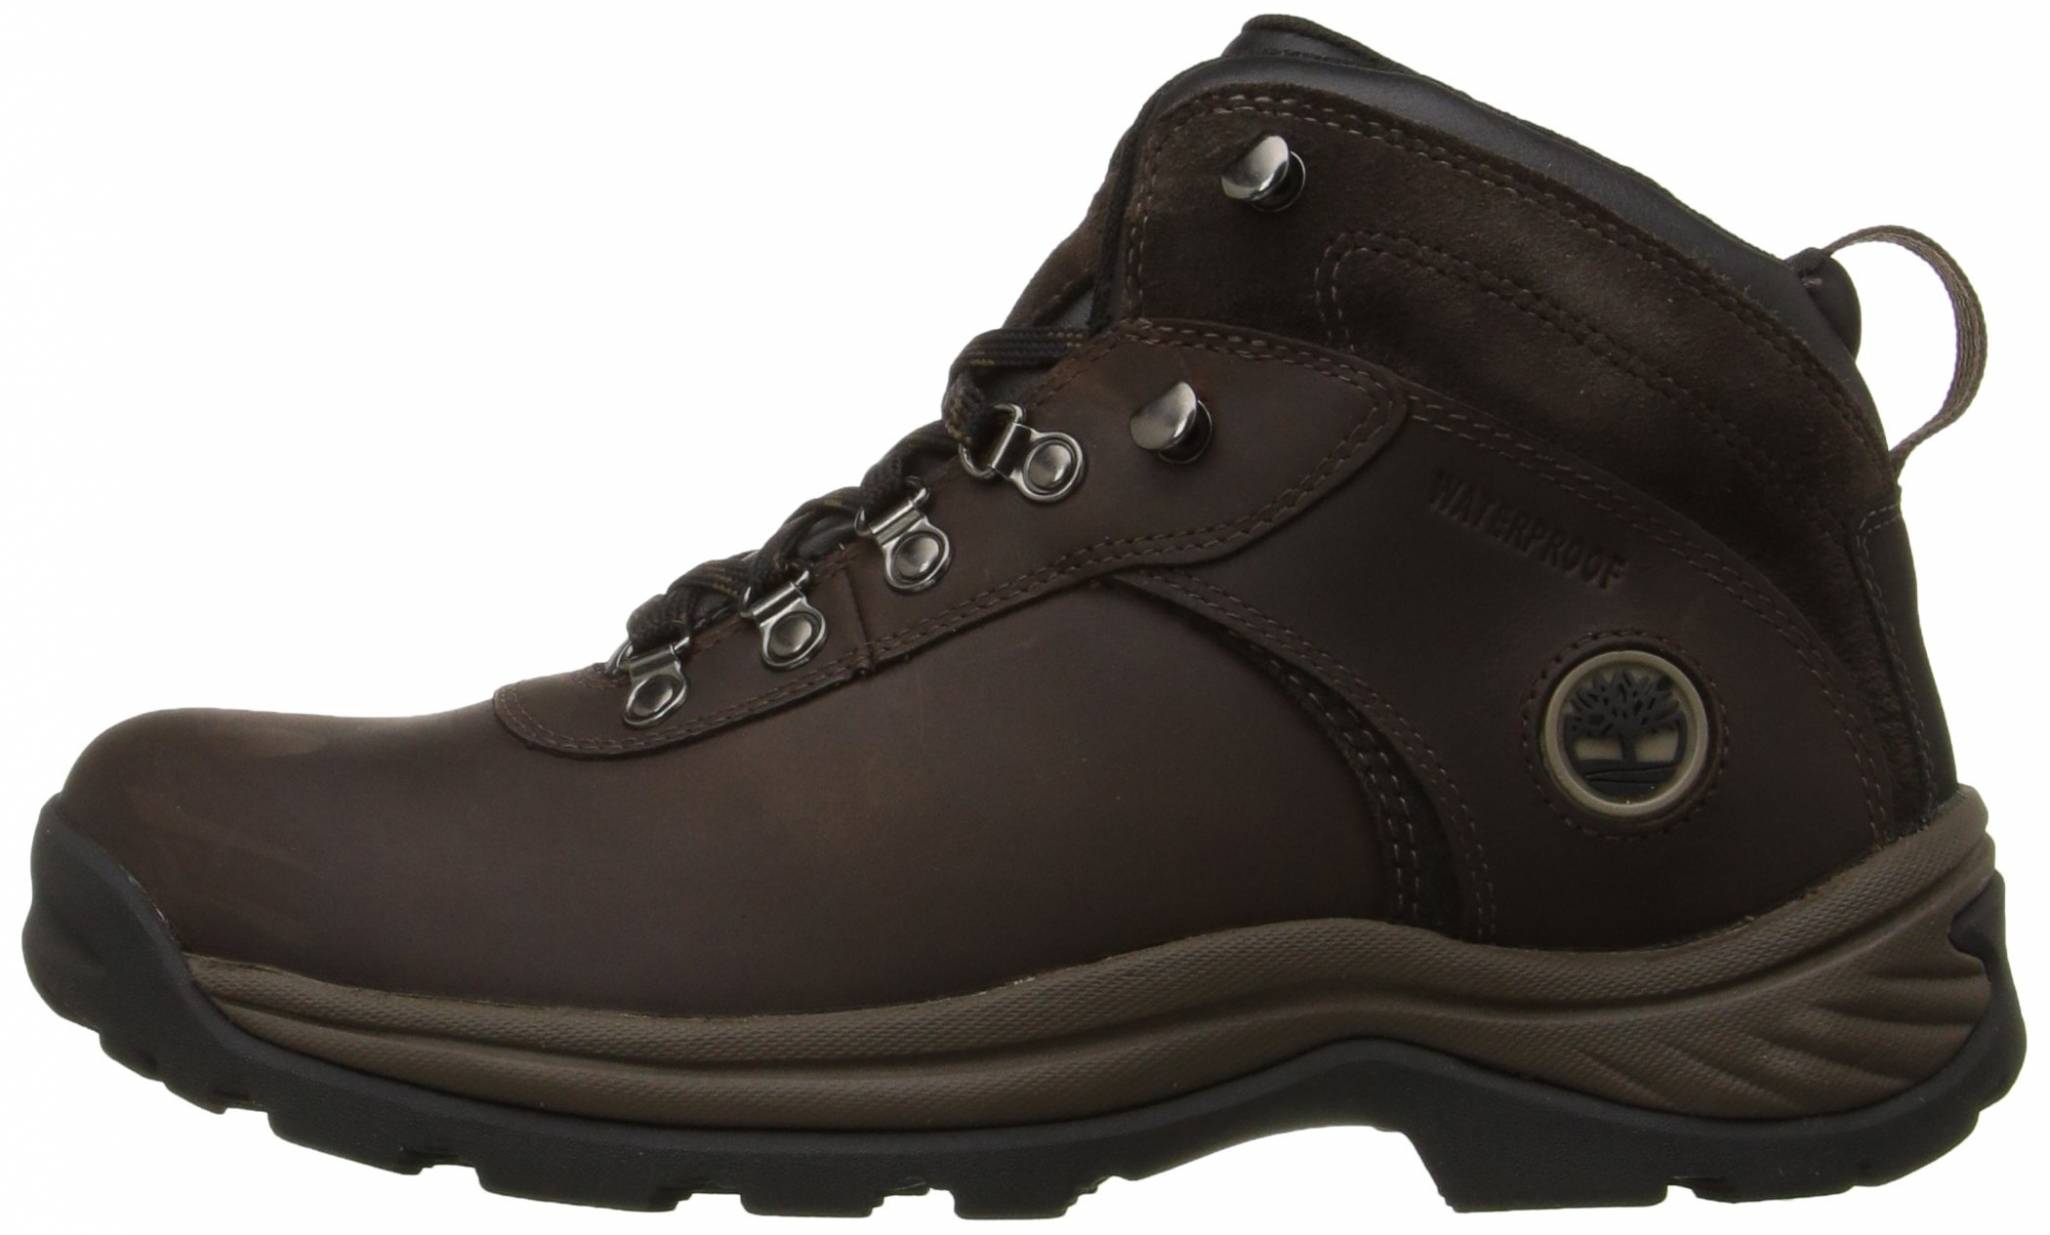 Tomato Unravel Turns into 10+ Timberland hiking boots: Save up to 27% | RunRepeat